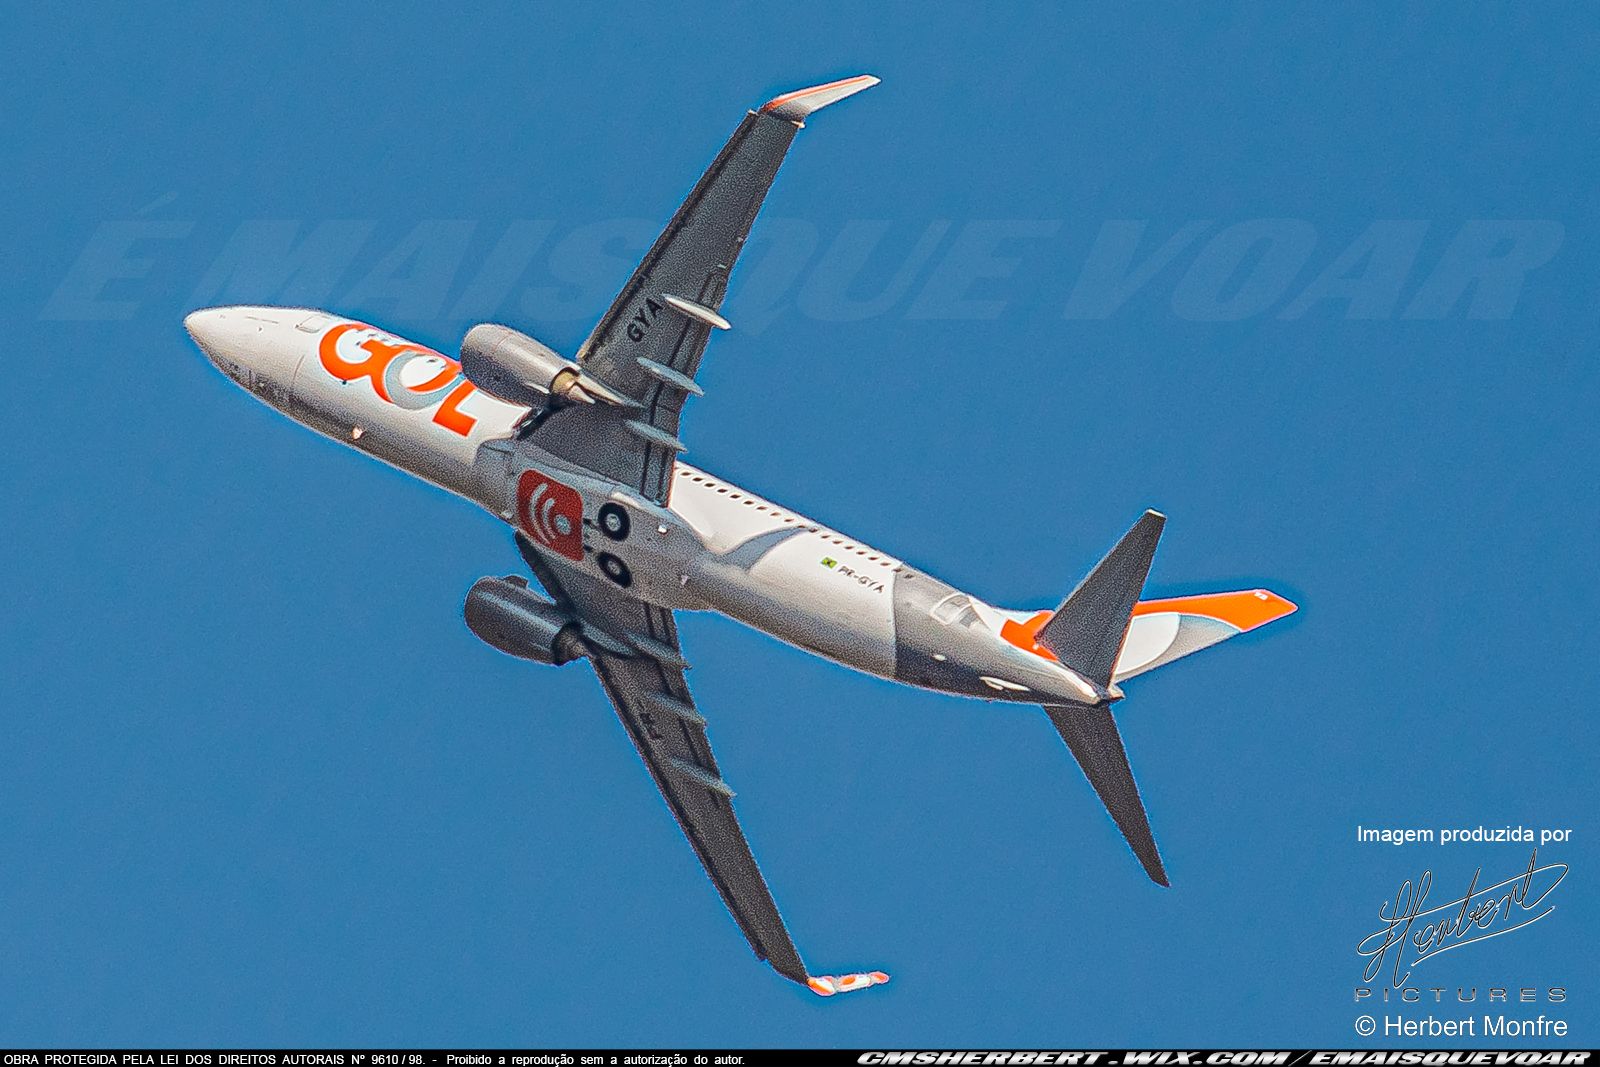 GOL Will Start Direct Flights Between Uruguaiana and Guarulhos | Photo © Herbert Monfre - Airplane photographer - Events - Advertising - Essays - Hire the photographer by e-mail cmsherbert@hotmail.com | Image produced by Herbert Pictures - MORE THAN FLY